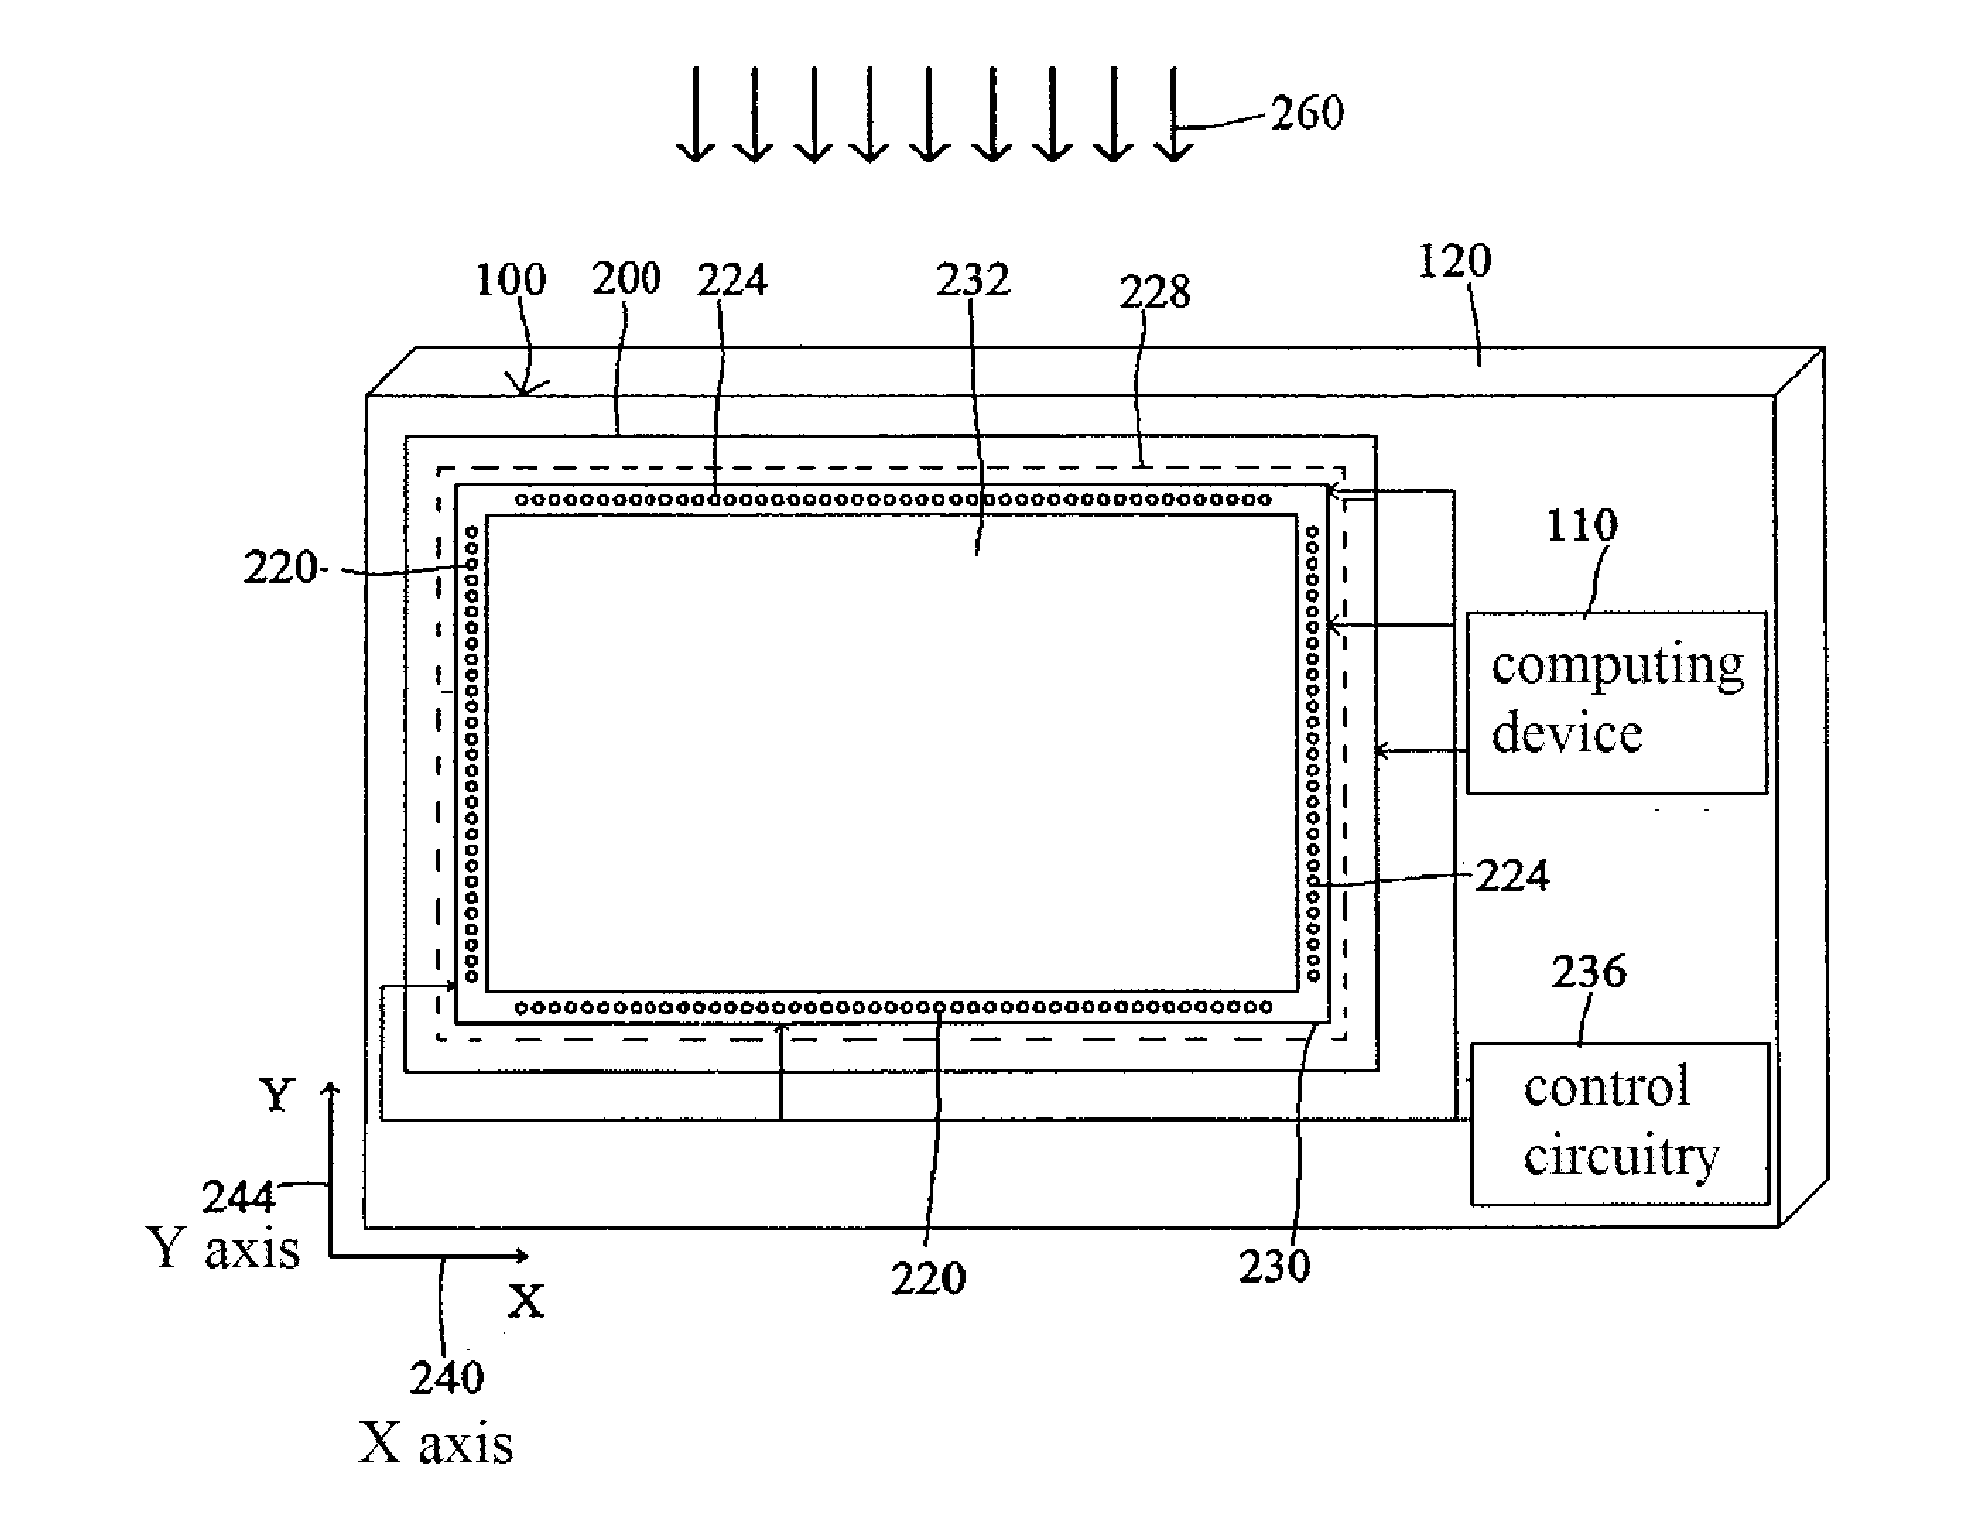 Method and Device for Adjusting Brightness of an Optical Touch Panel